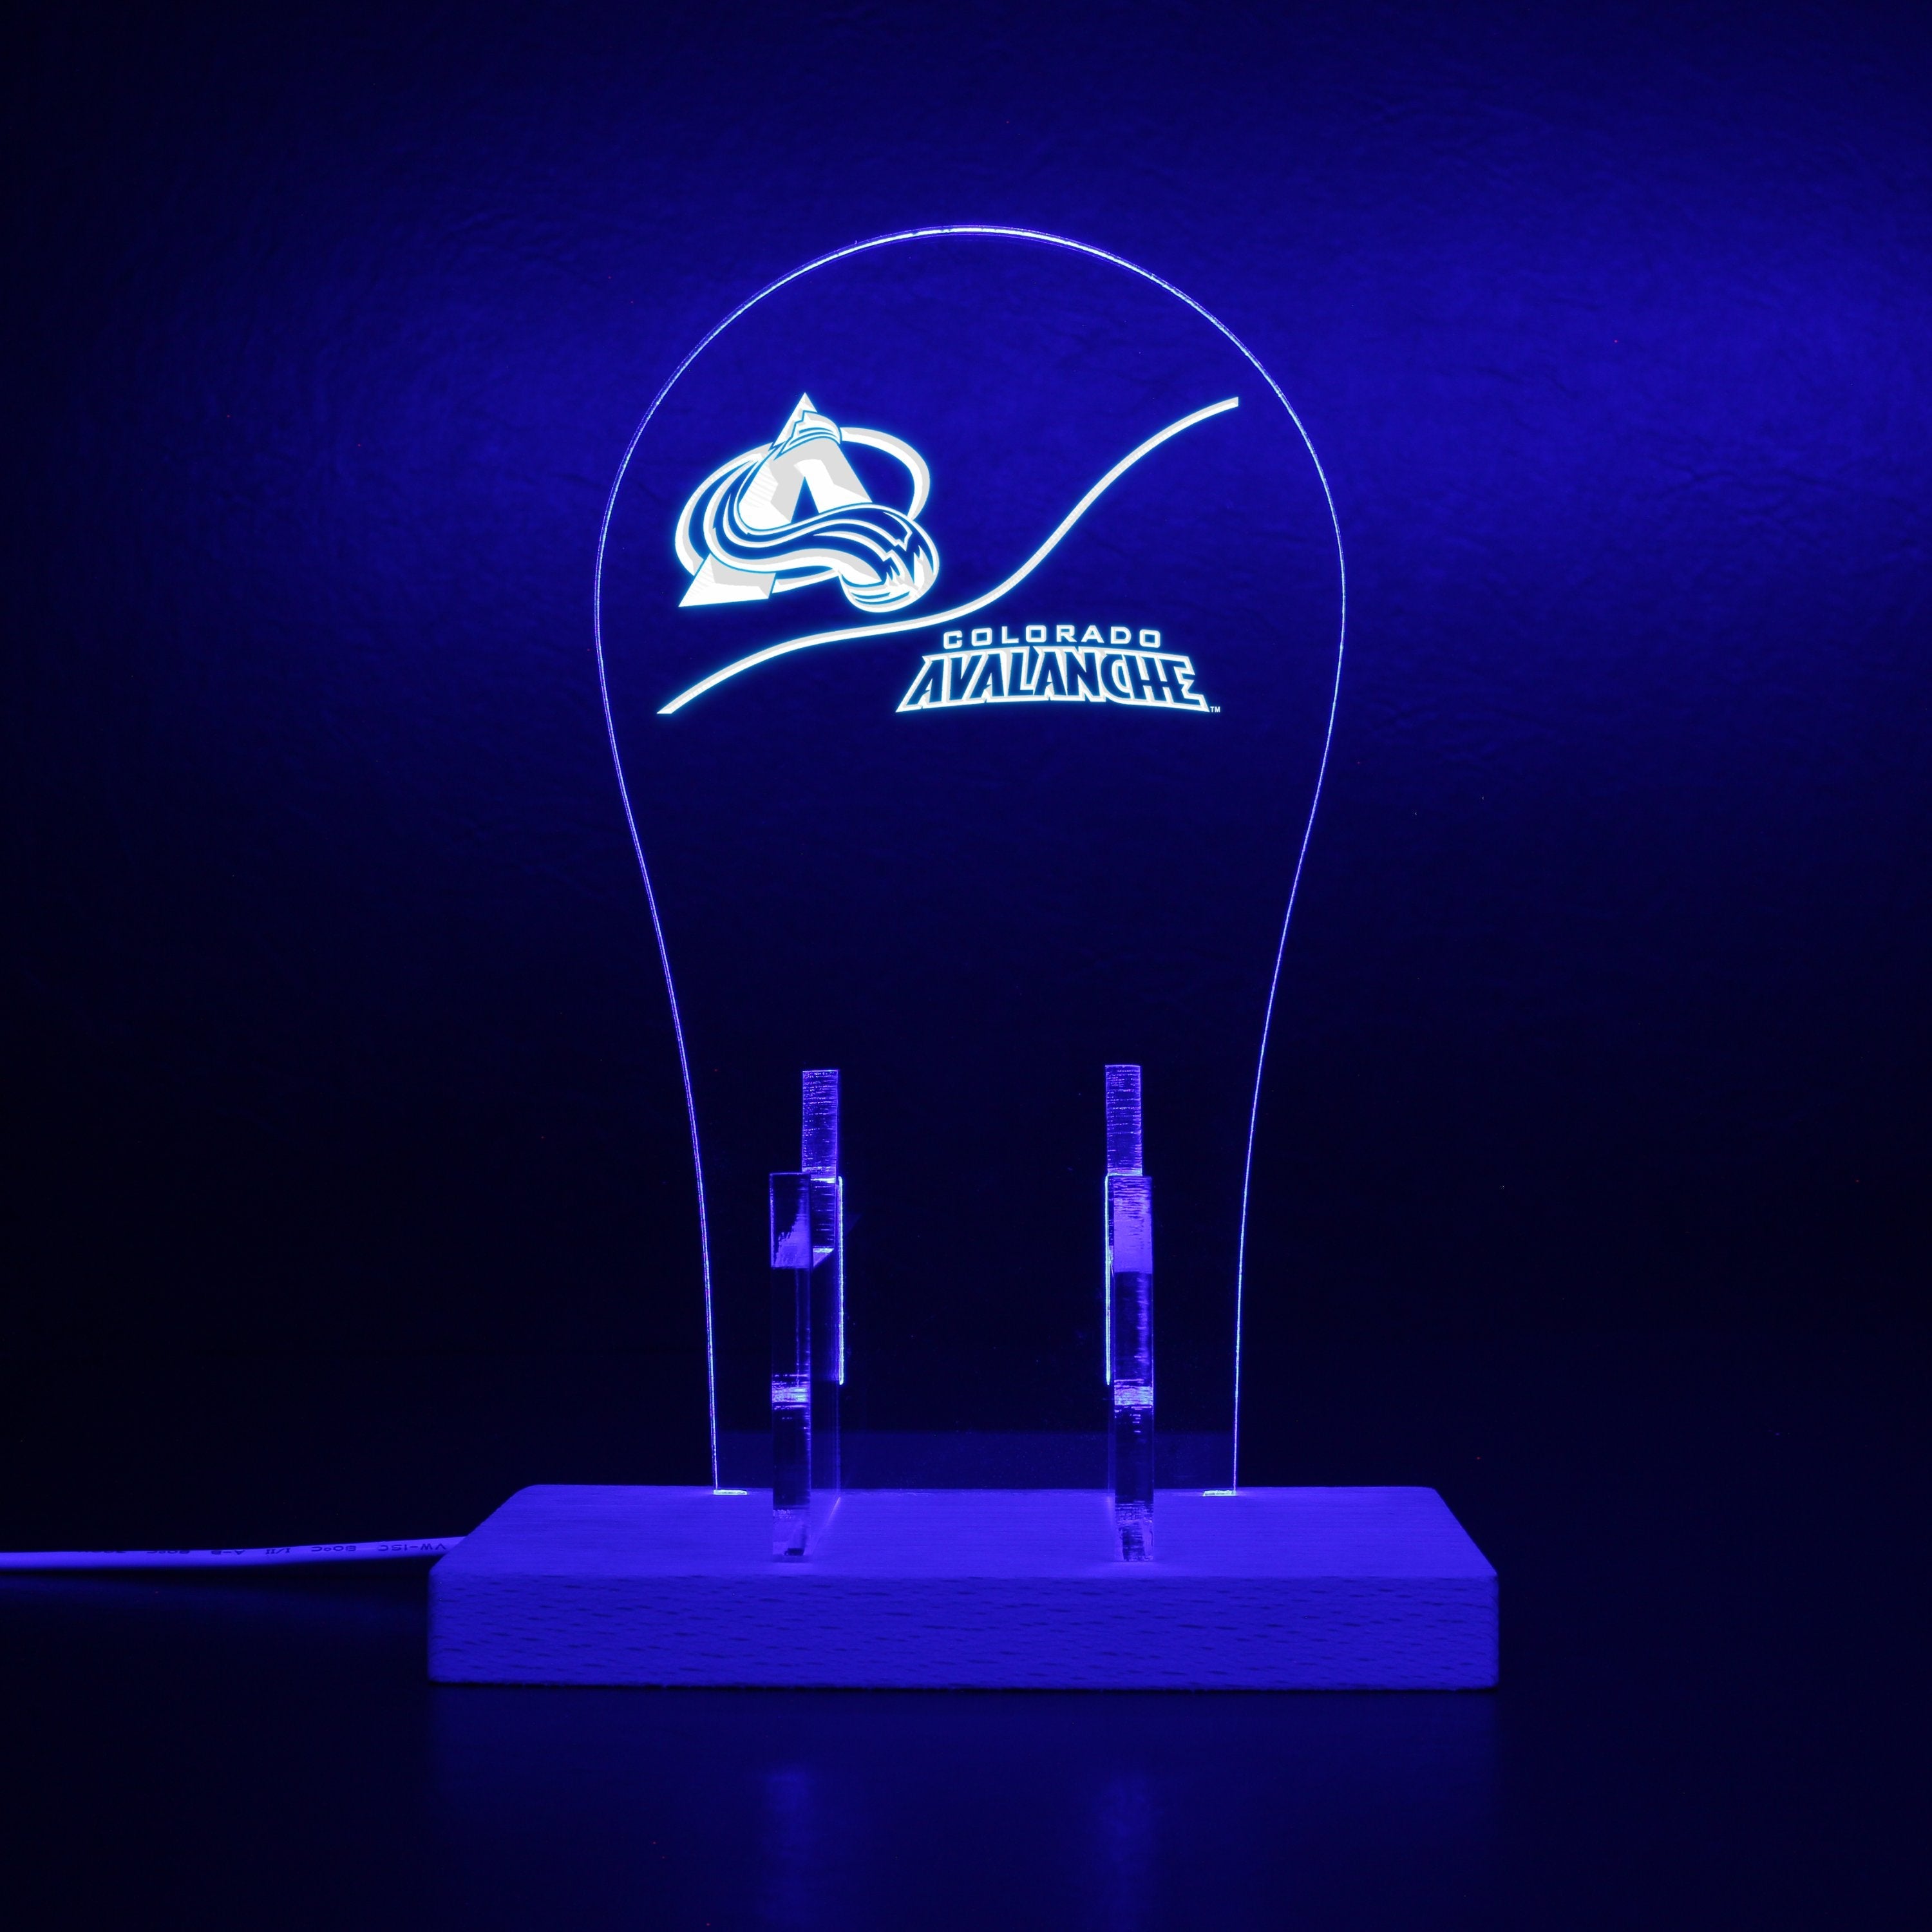 Colorado Avalanche LED Gaming Headset Controller Stand